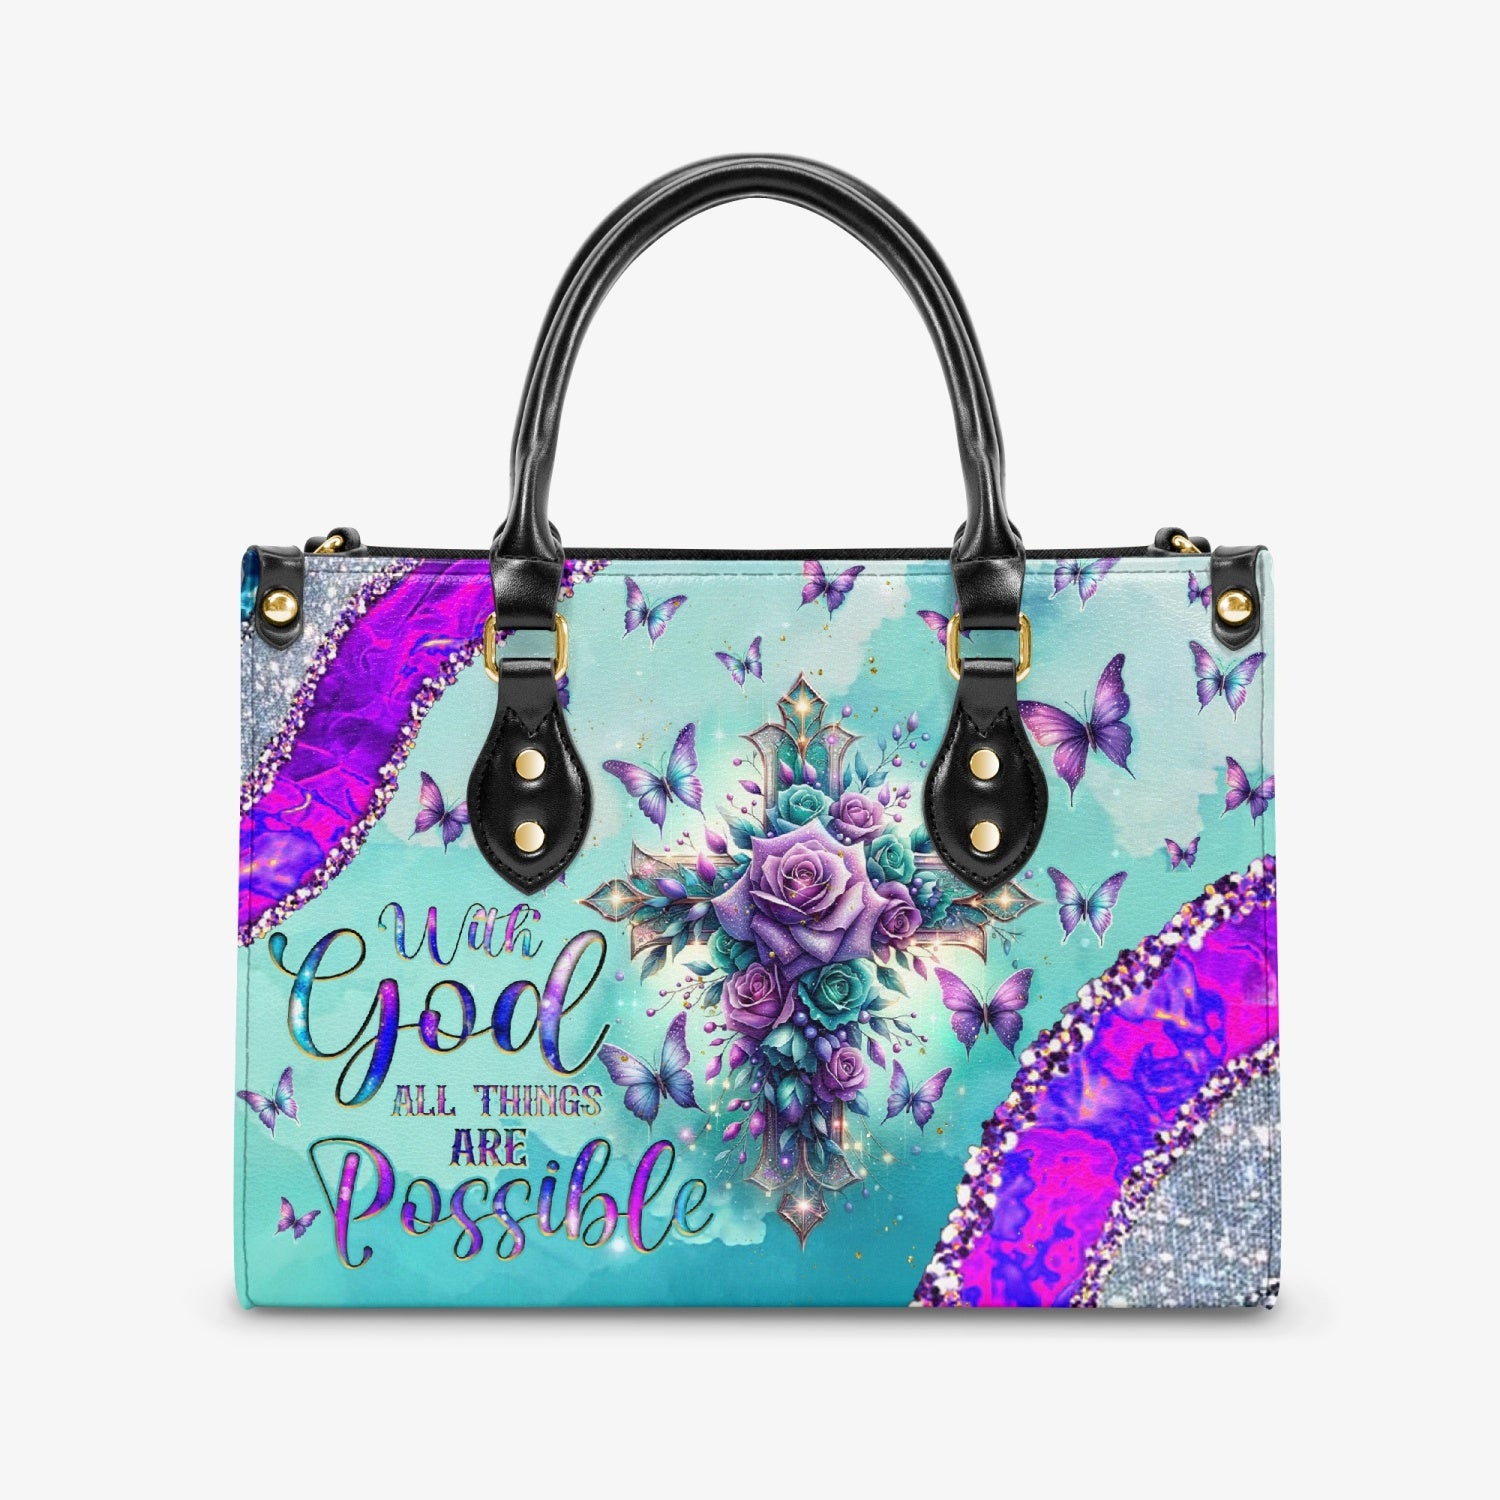 With God All Things Are Possible Leather Handbag - Tlnz0304242